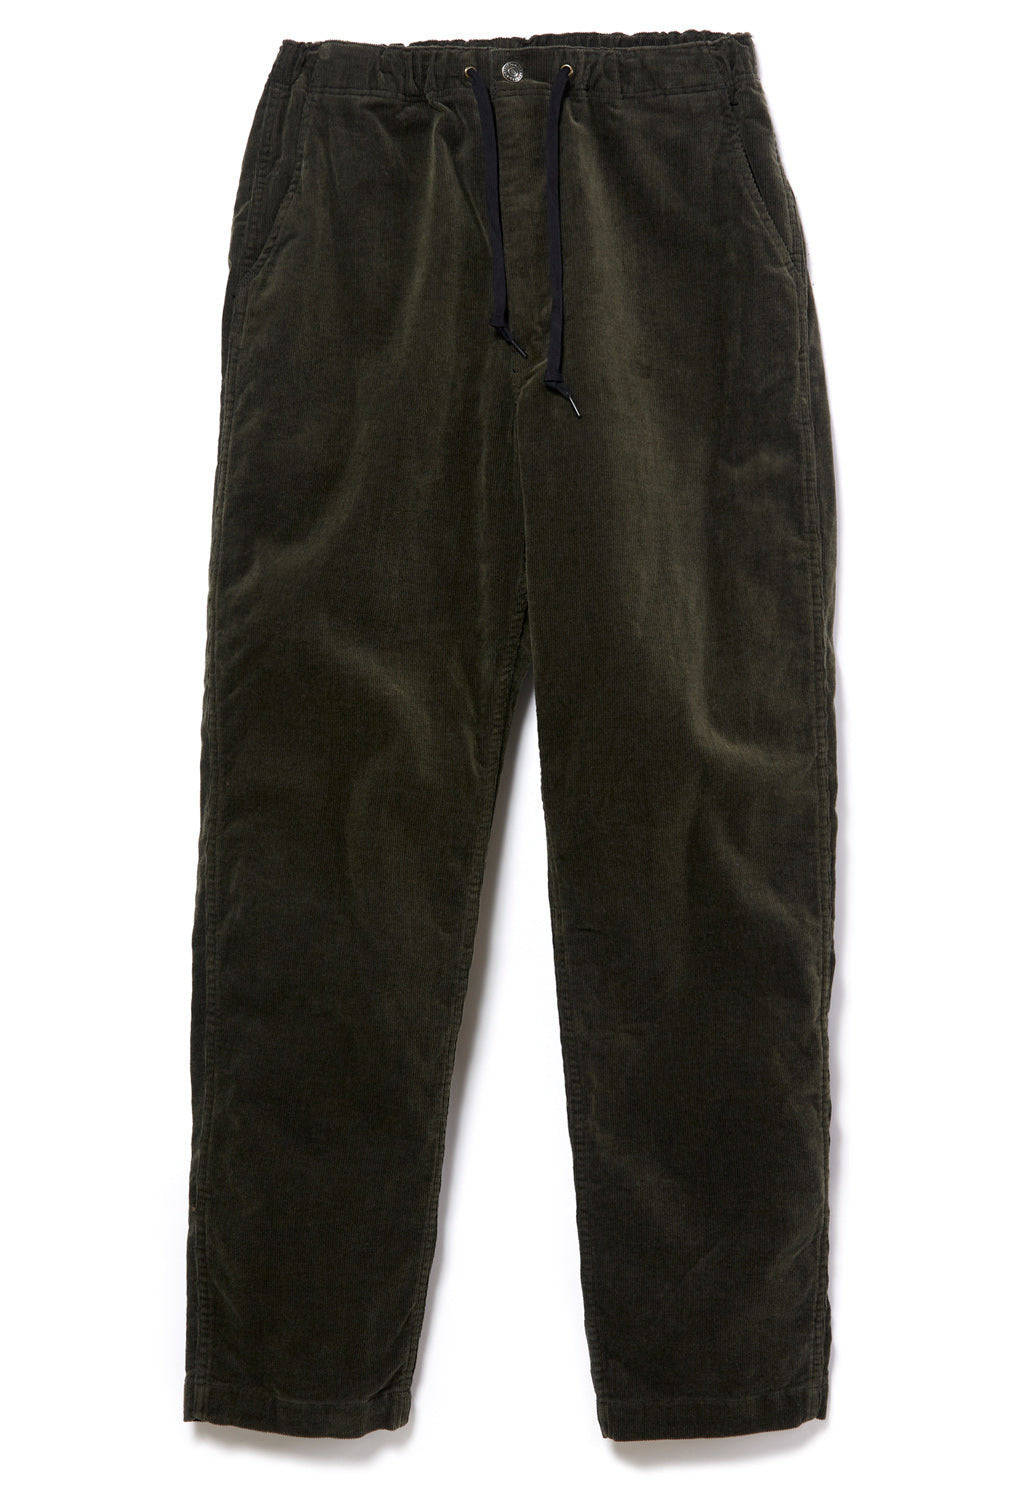 orSlow New Yorker Stretch Corduroy Pants 5